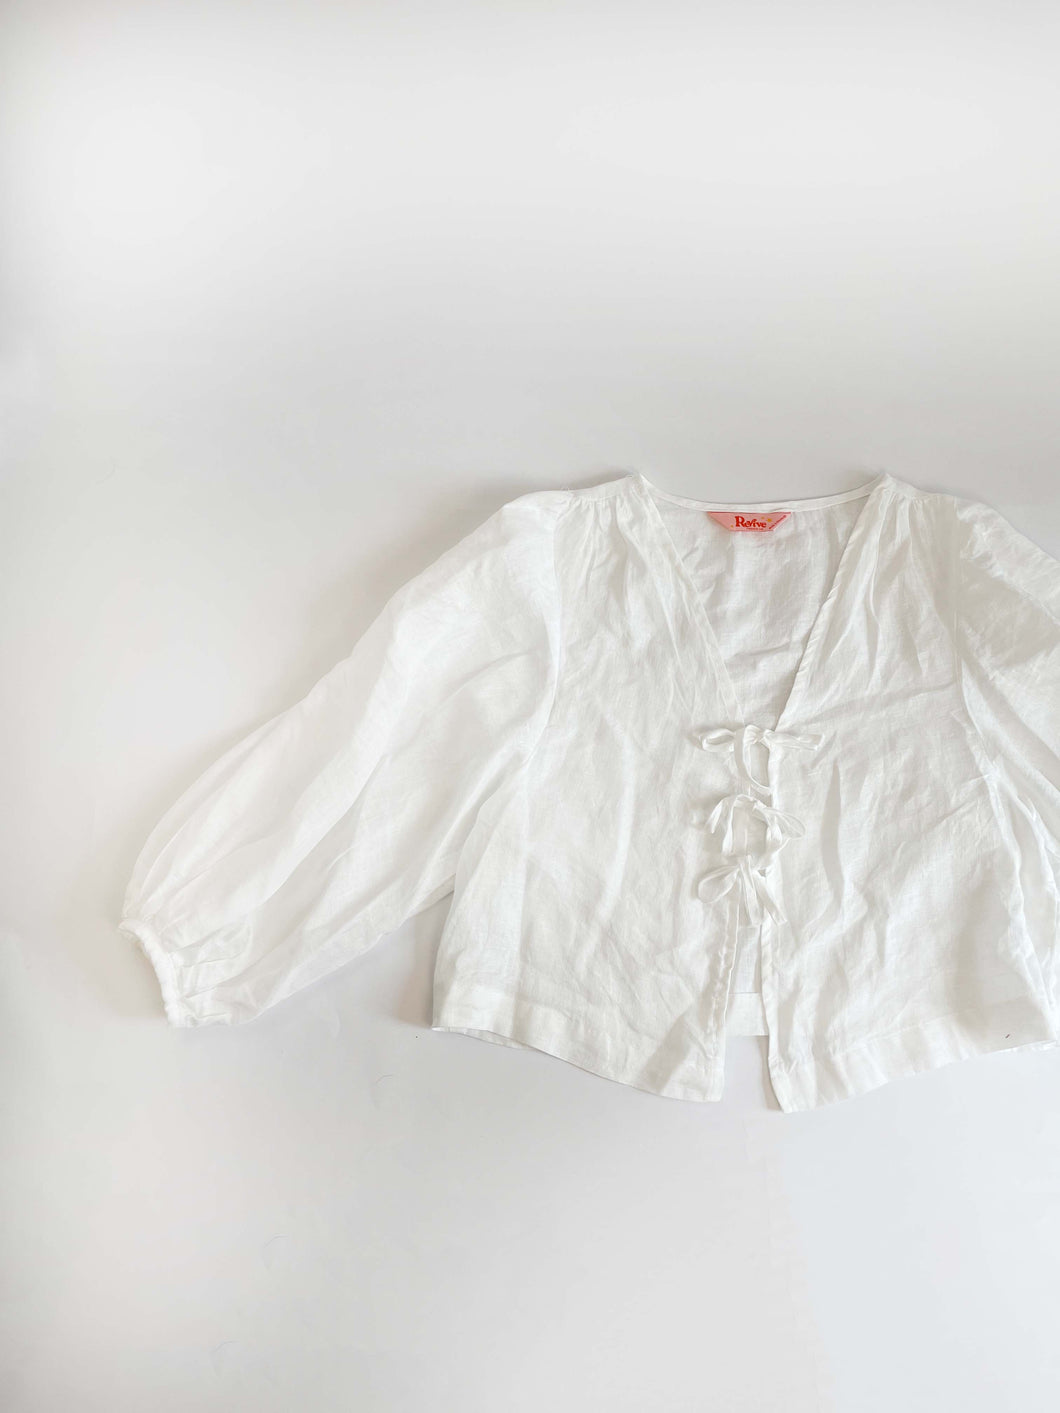 Belle Blouse - Imperfect Test Sample